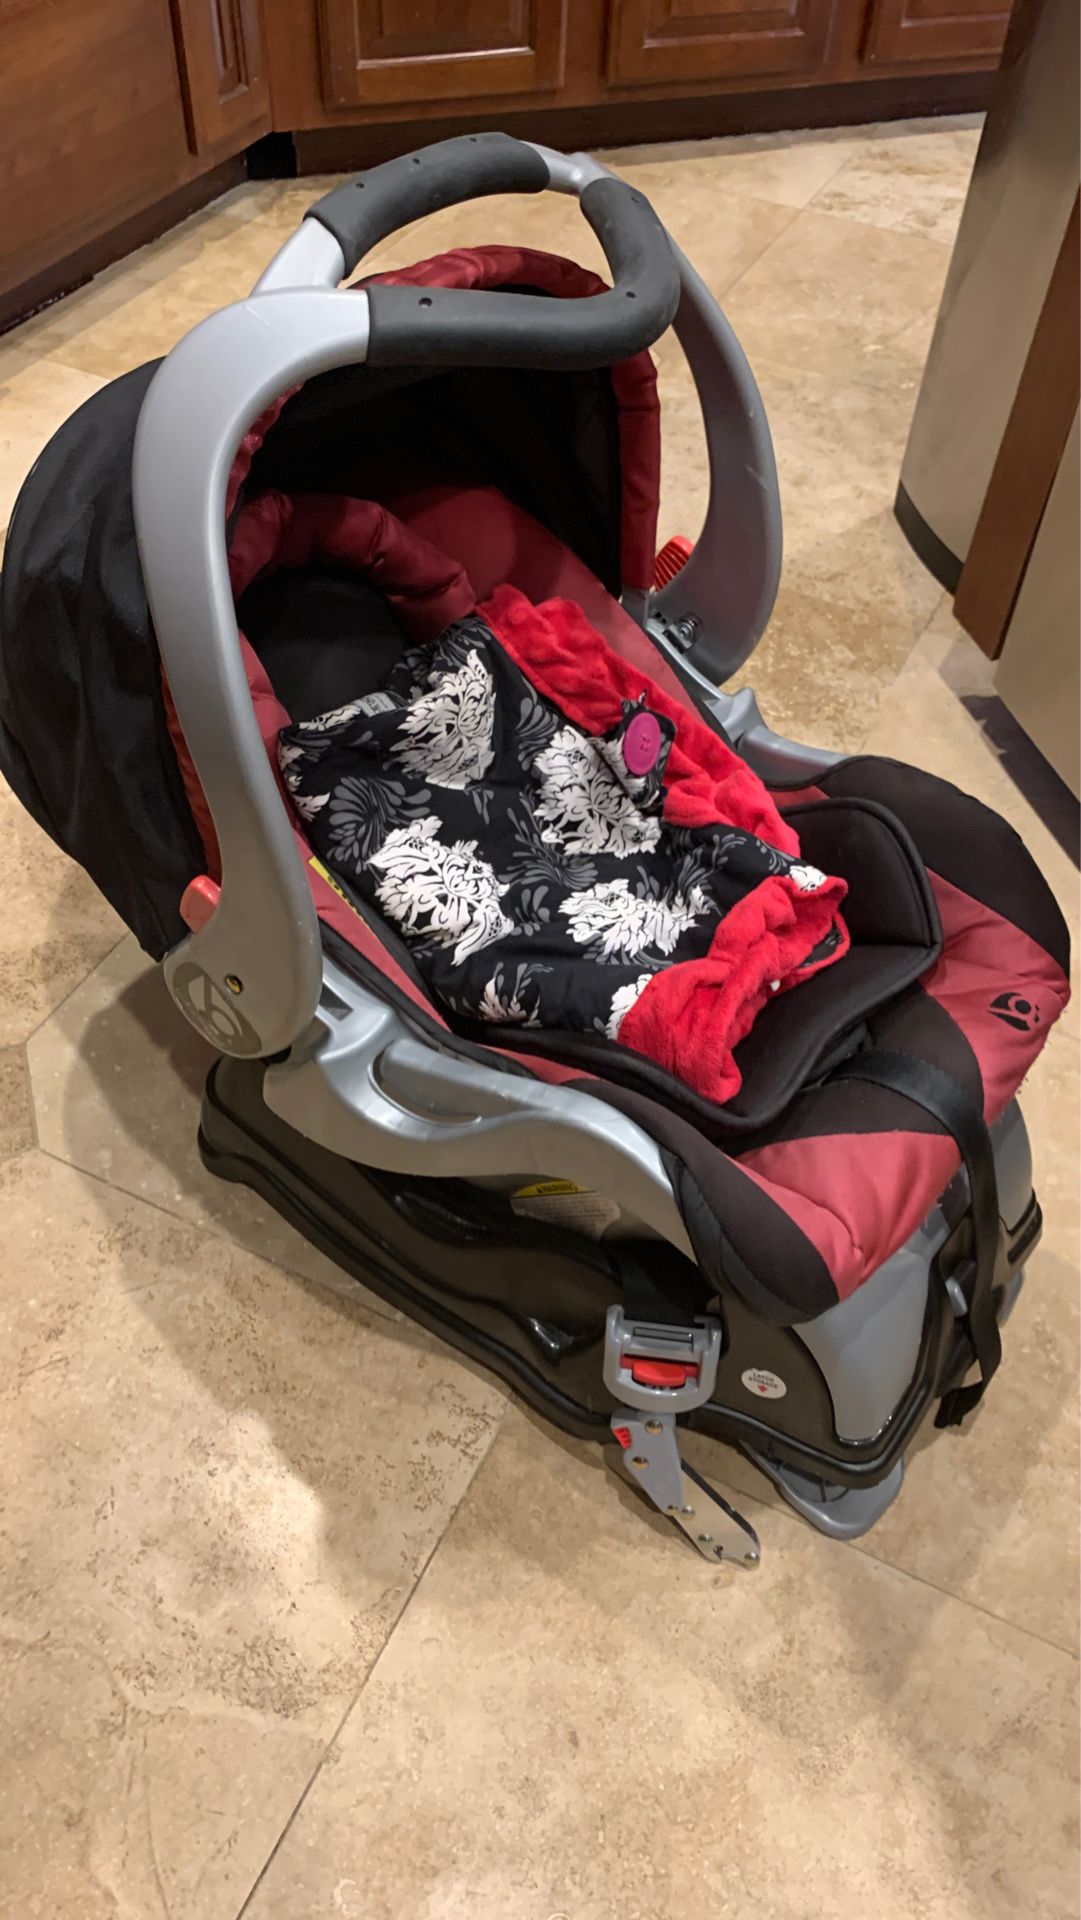 Baby trend infant car seat and double stroller. Sold together or separately. Pink in color. Will throw in the top cover for free